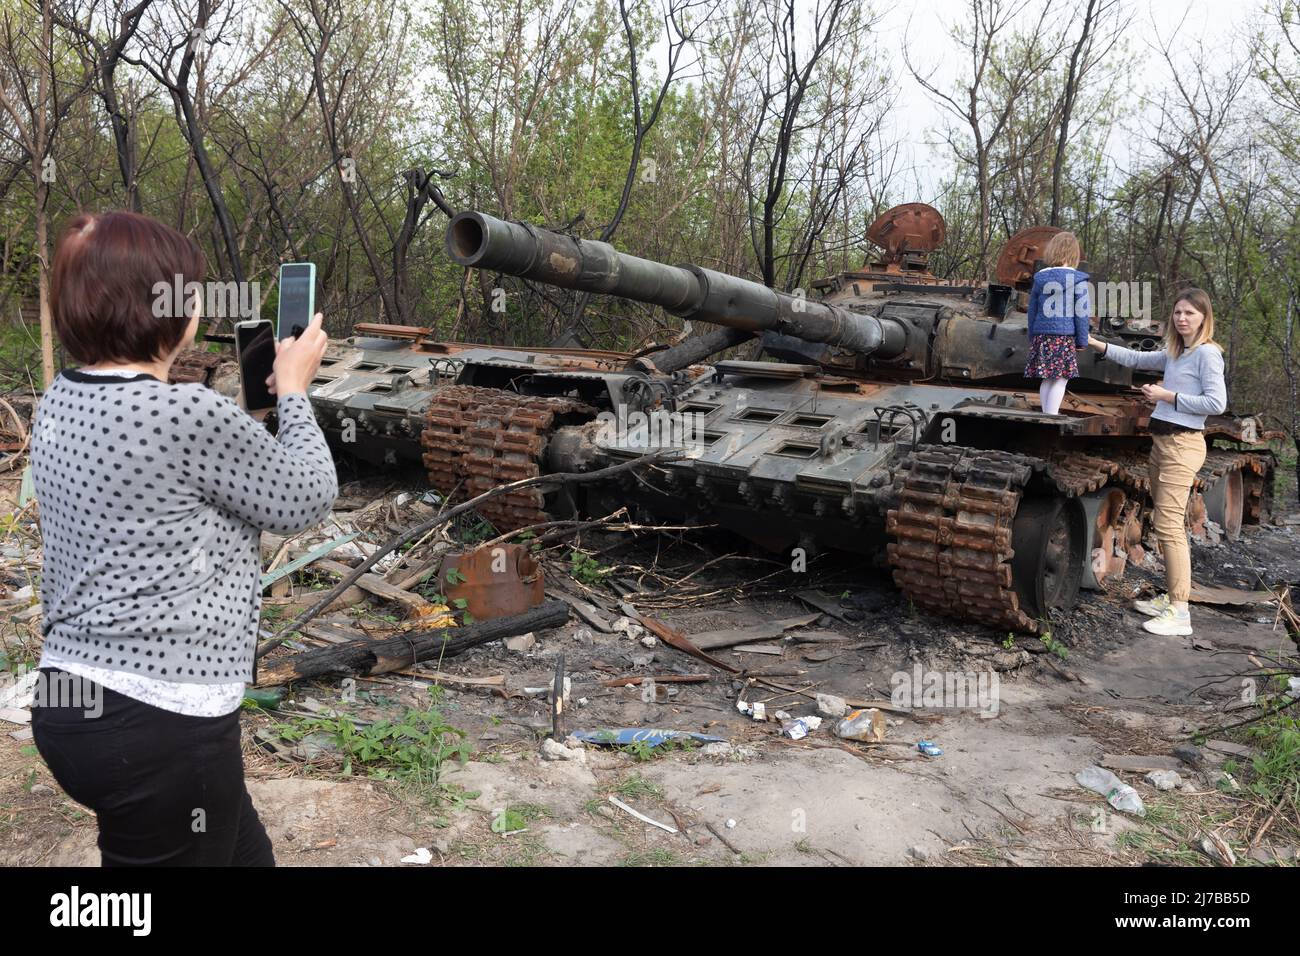 A woman takes photos of a girl standing on the tower of a destroyed Russian tank near Makariv village, Kyiv region. Russia invaded Ukraine on 24 February 2022, triggering the largest military attack in Europe since World War II. Stock Photo